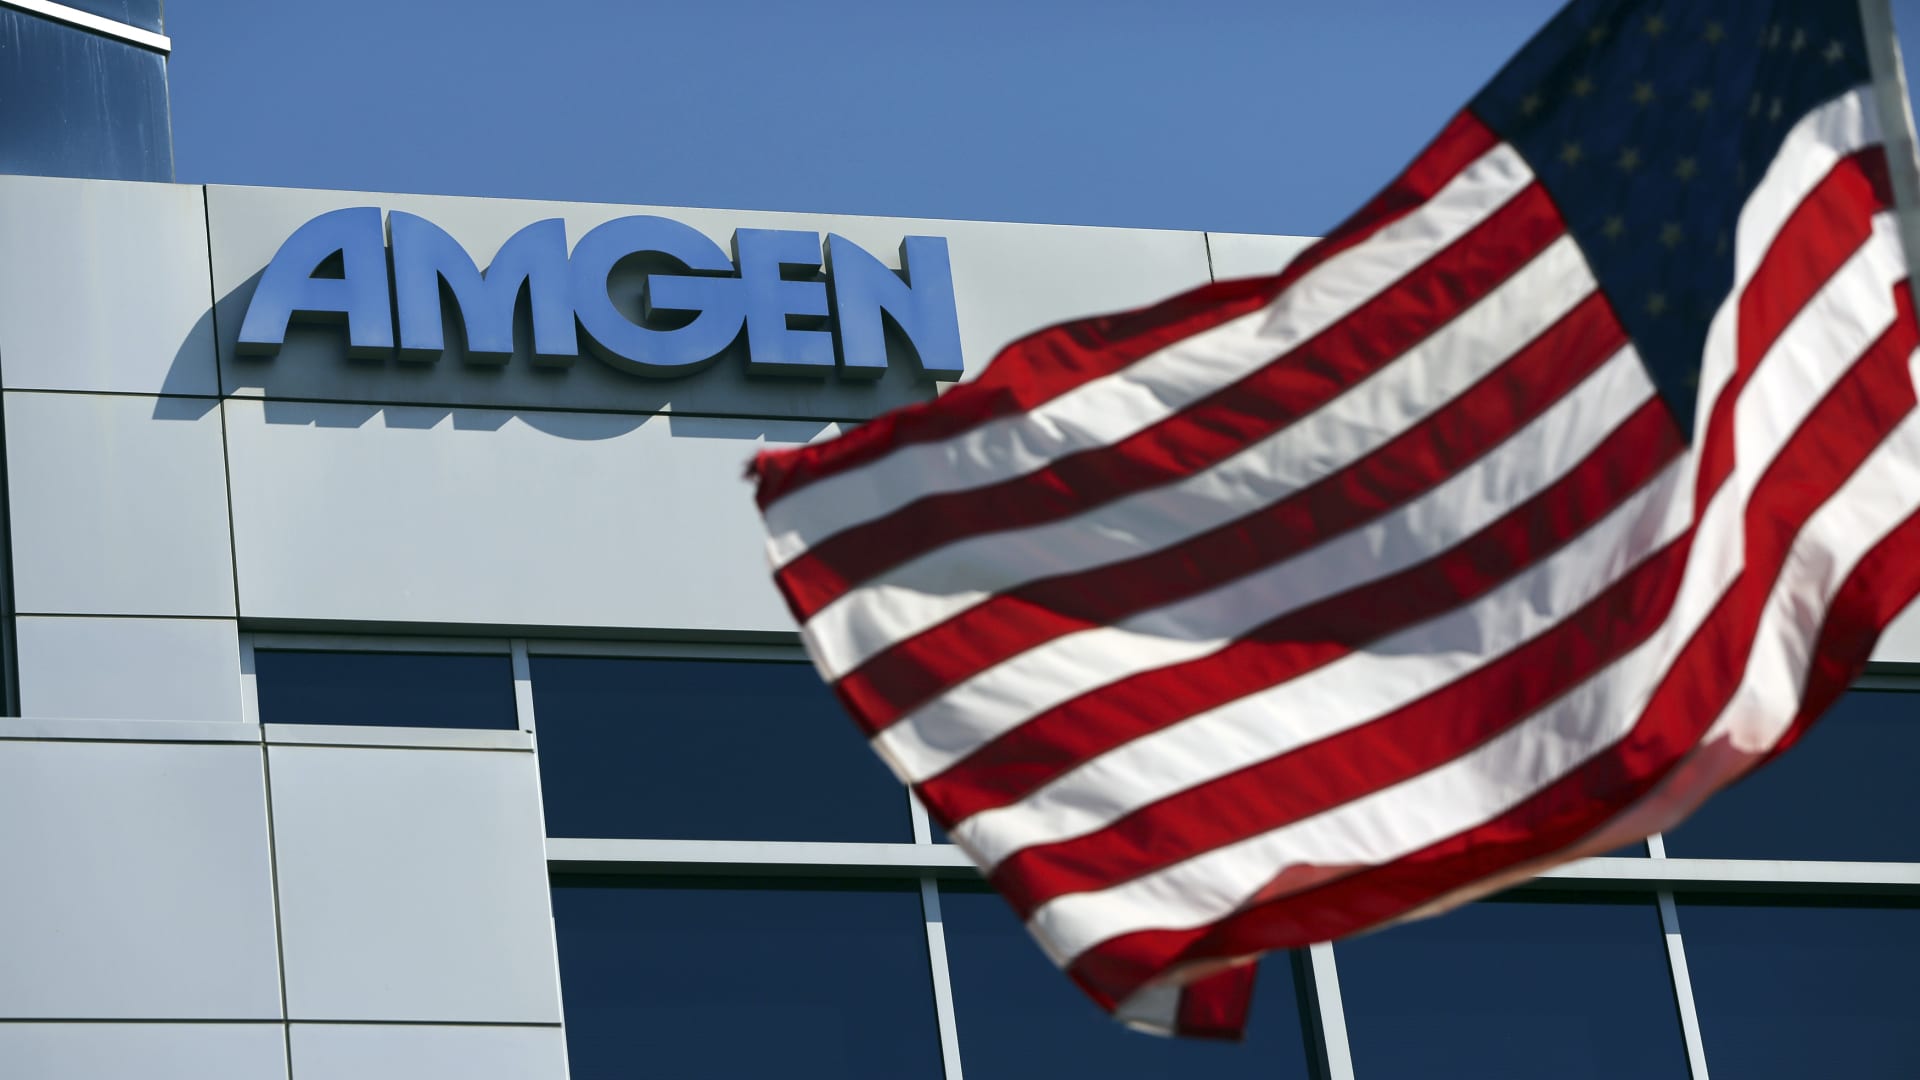 Sell biopharma stock Amgen ahead of its obesity drug update, Barclays says